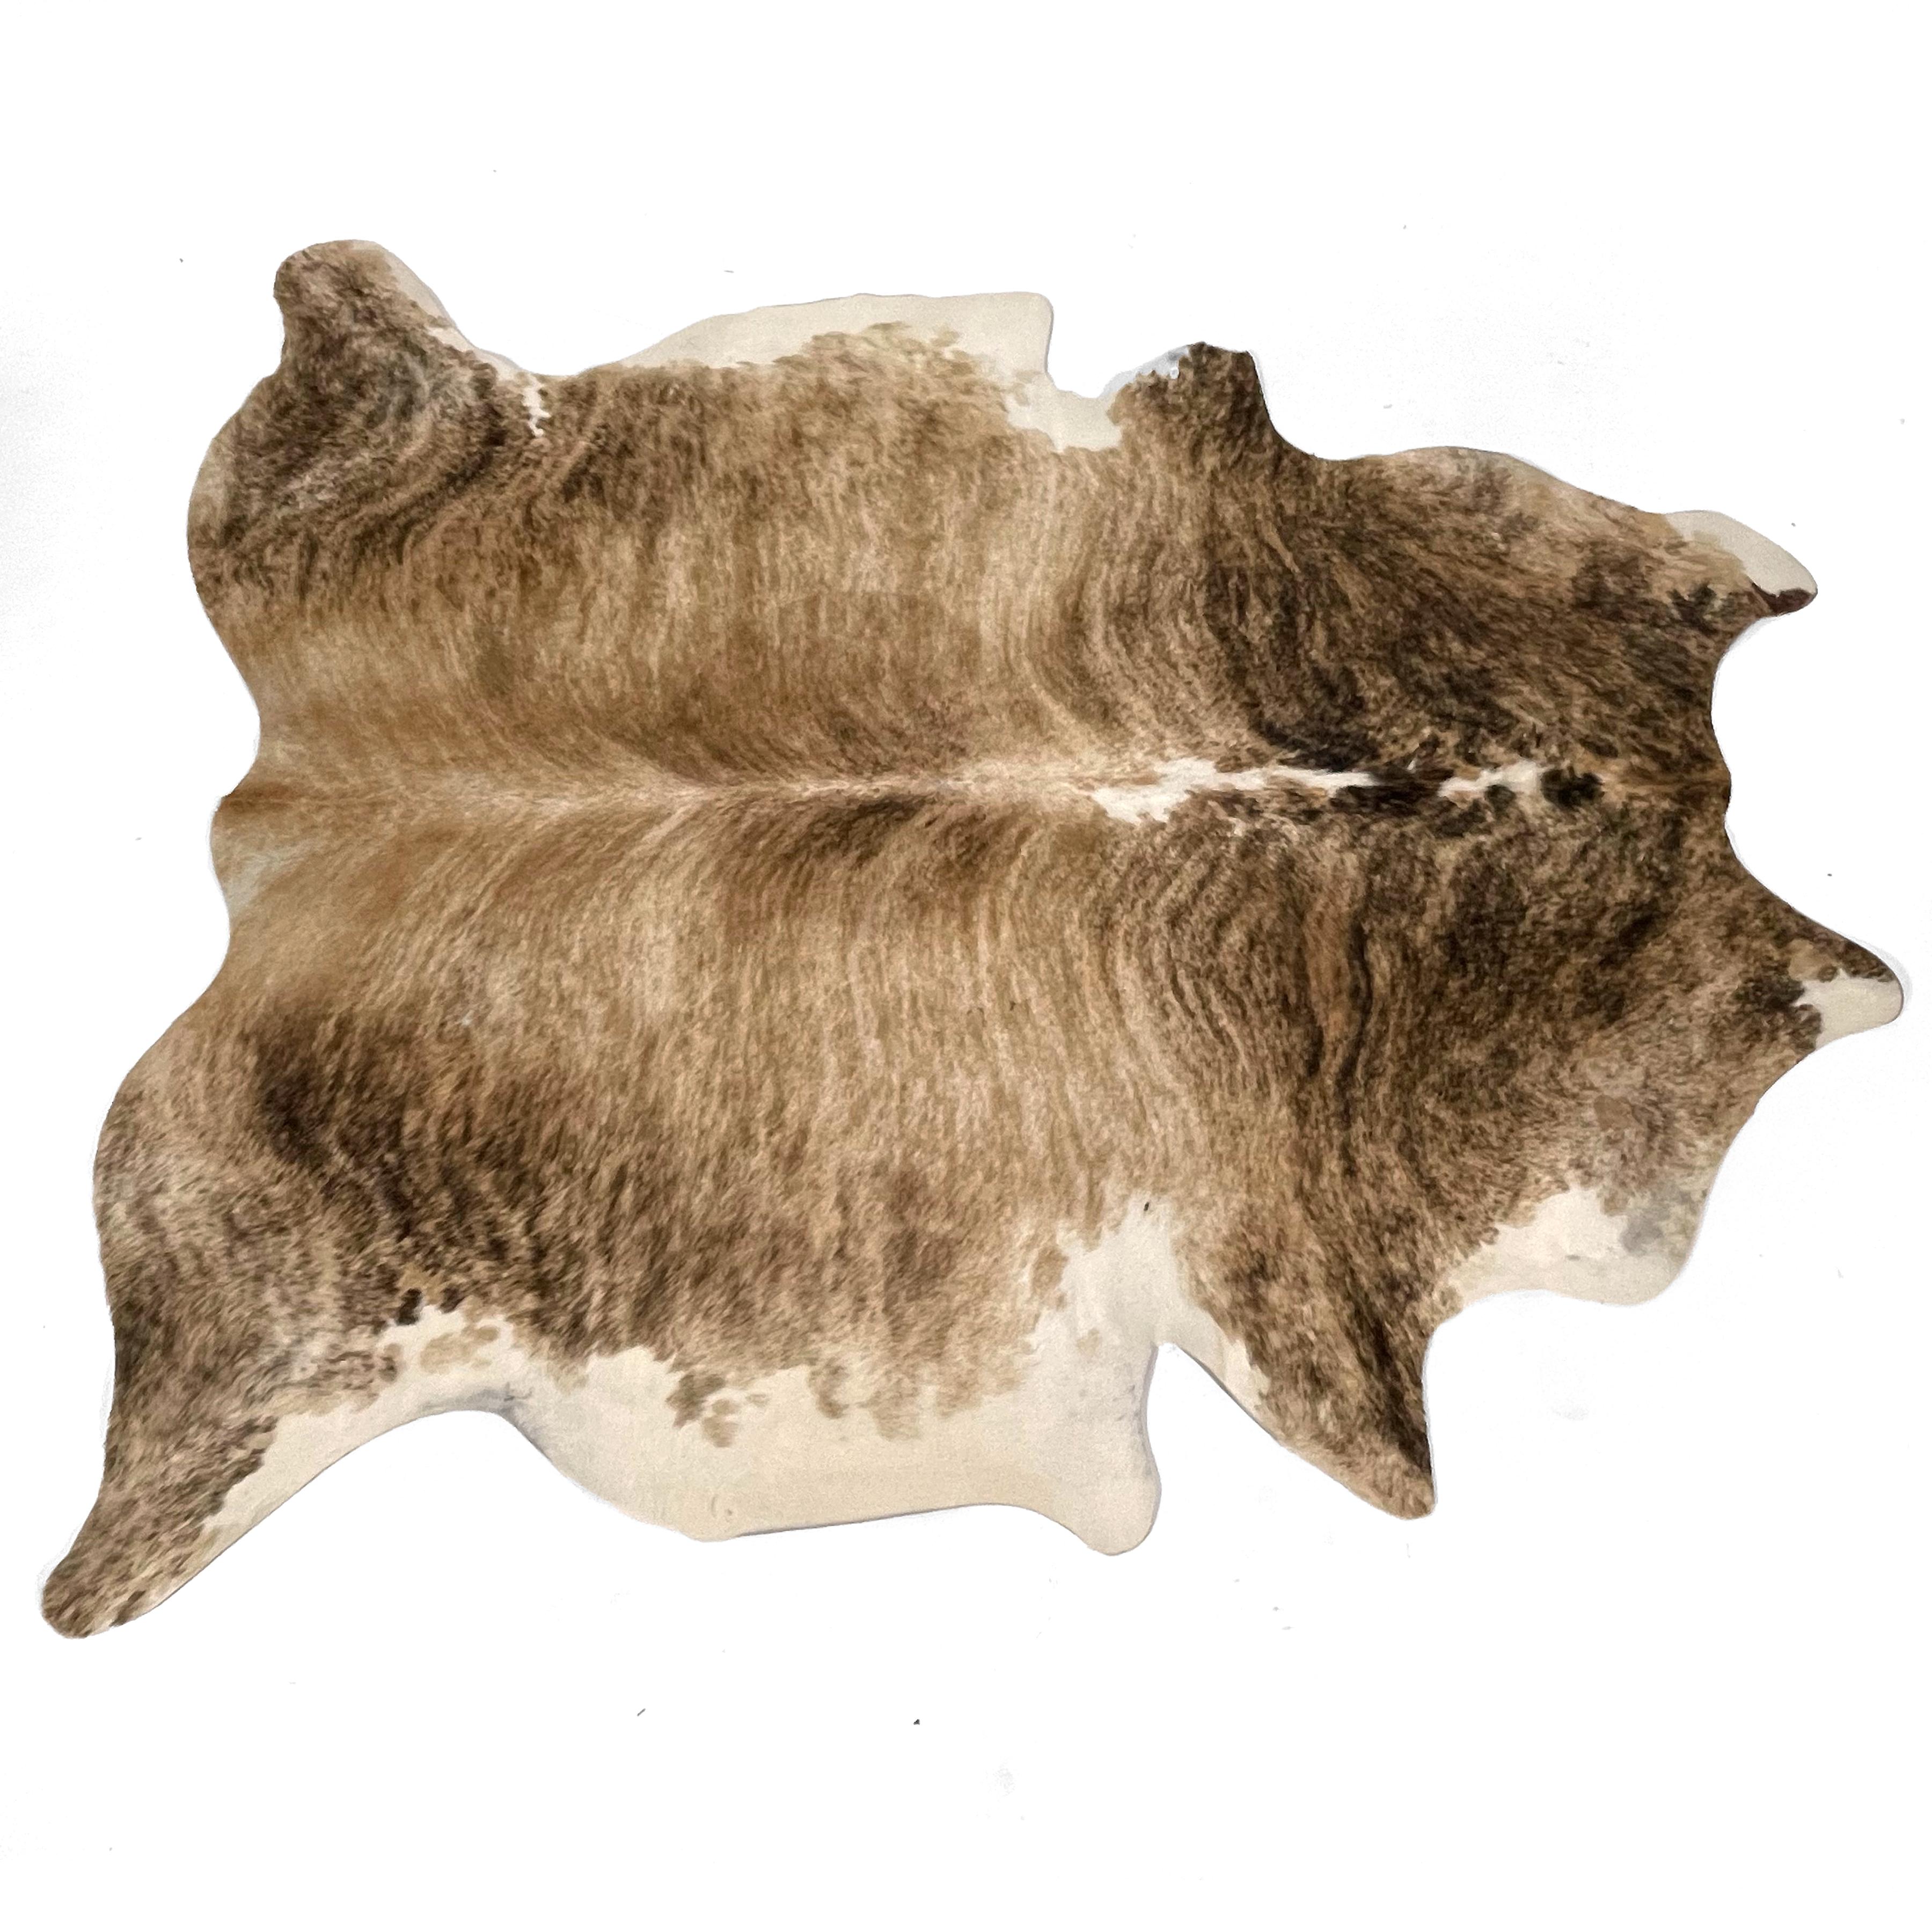 This cow hide rug is not only beautiful with it's brindle color and markings, it is in great condition.